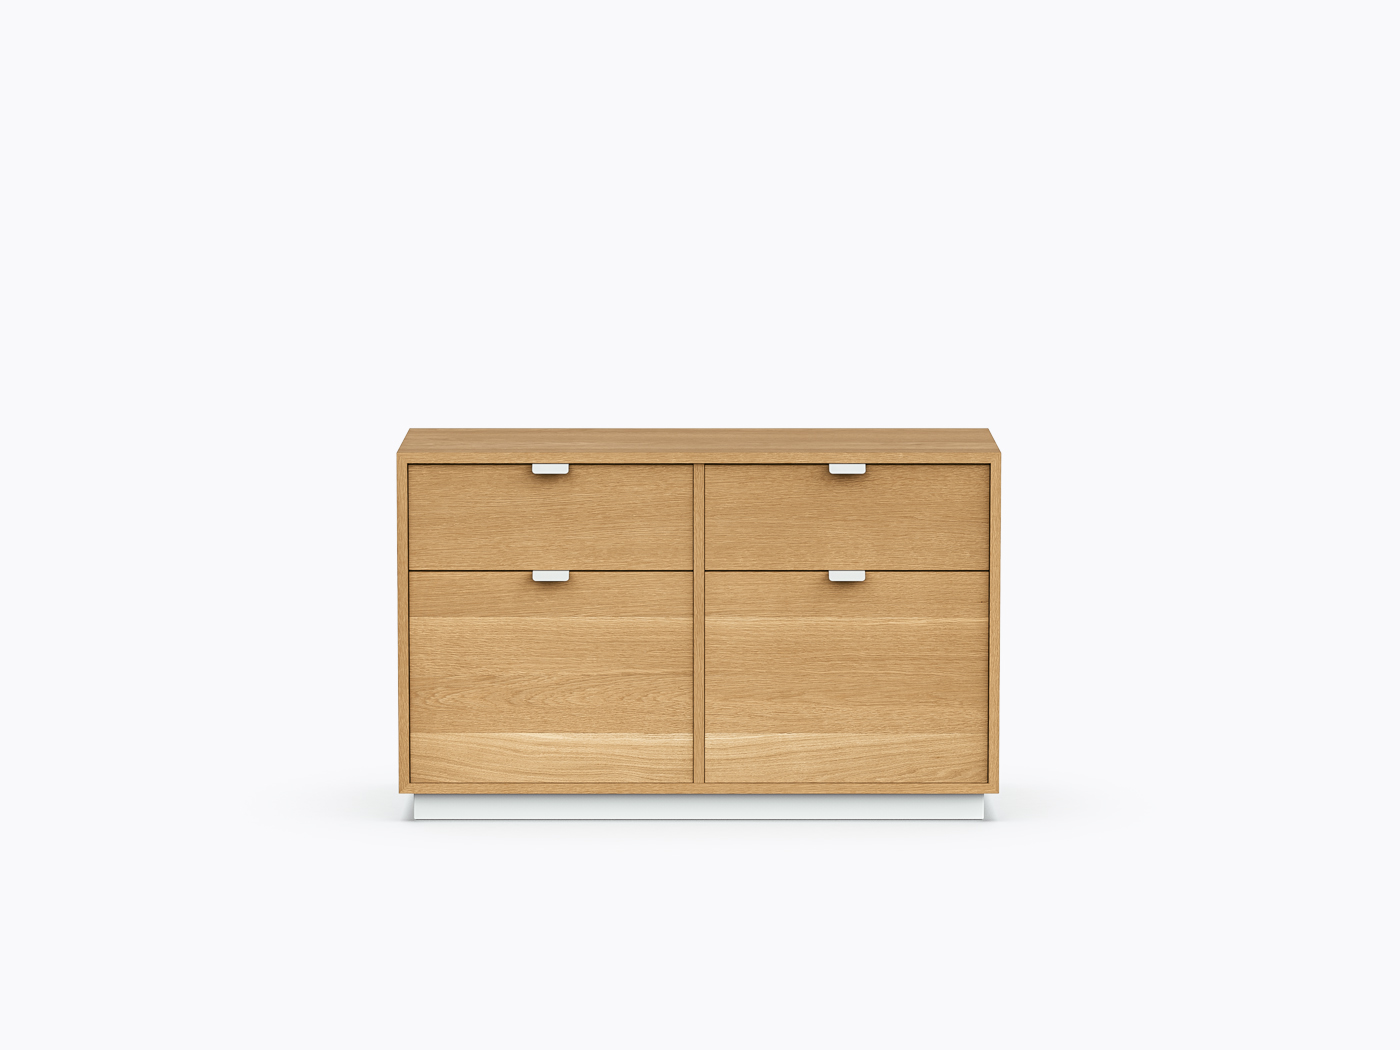 Ross Double - 2 drawers / 2 file drawers - White Oak